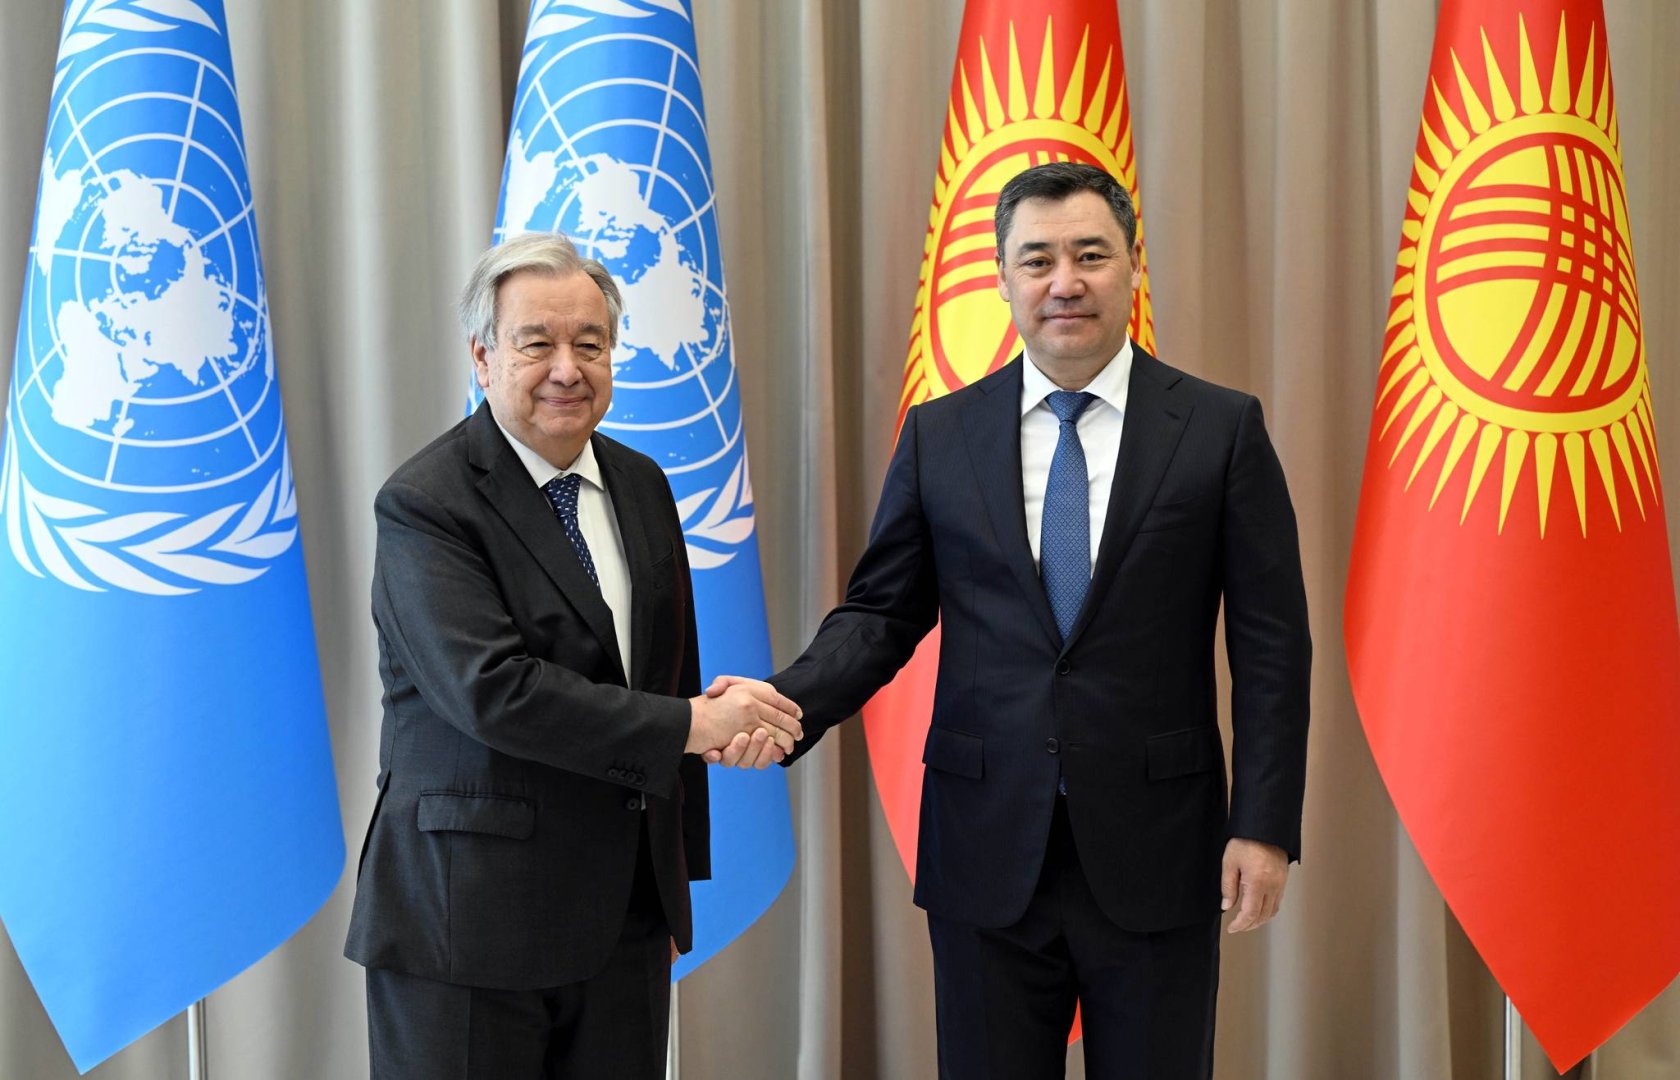 UN SDGs form foundation of Kyrgyzstan's state policy, president says